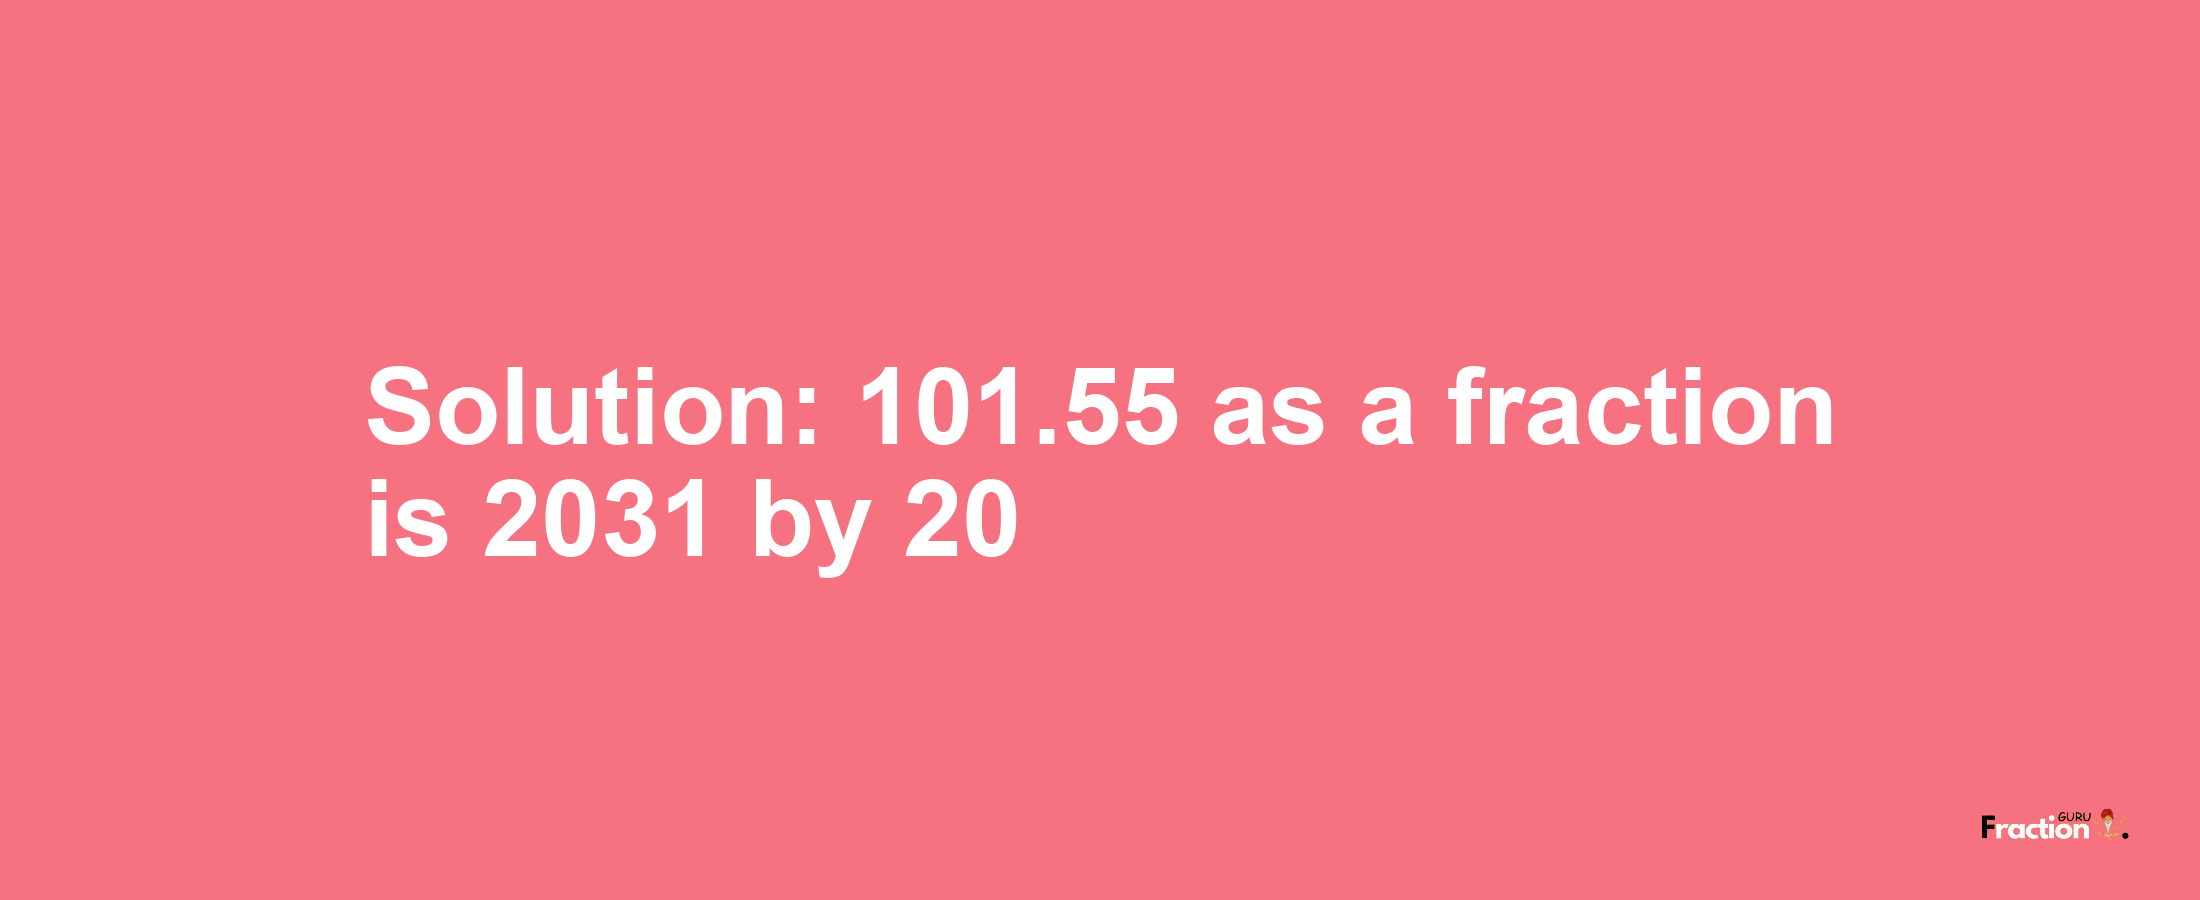 Solution:101.55 as a fraction is 2031/20